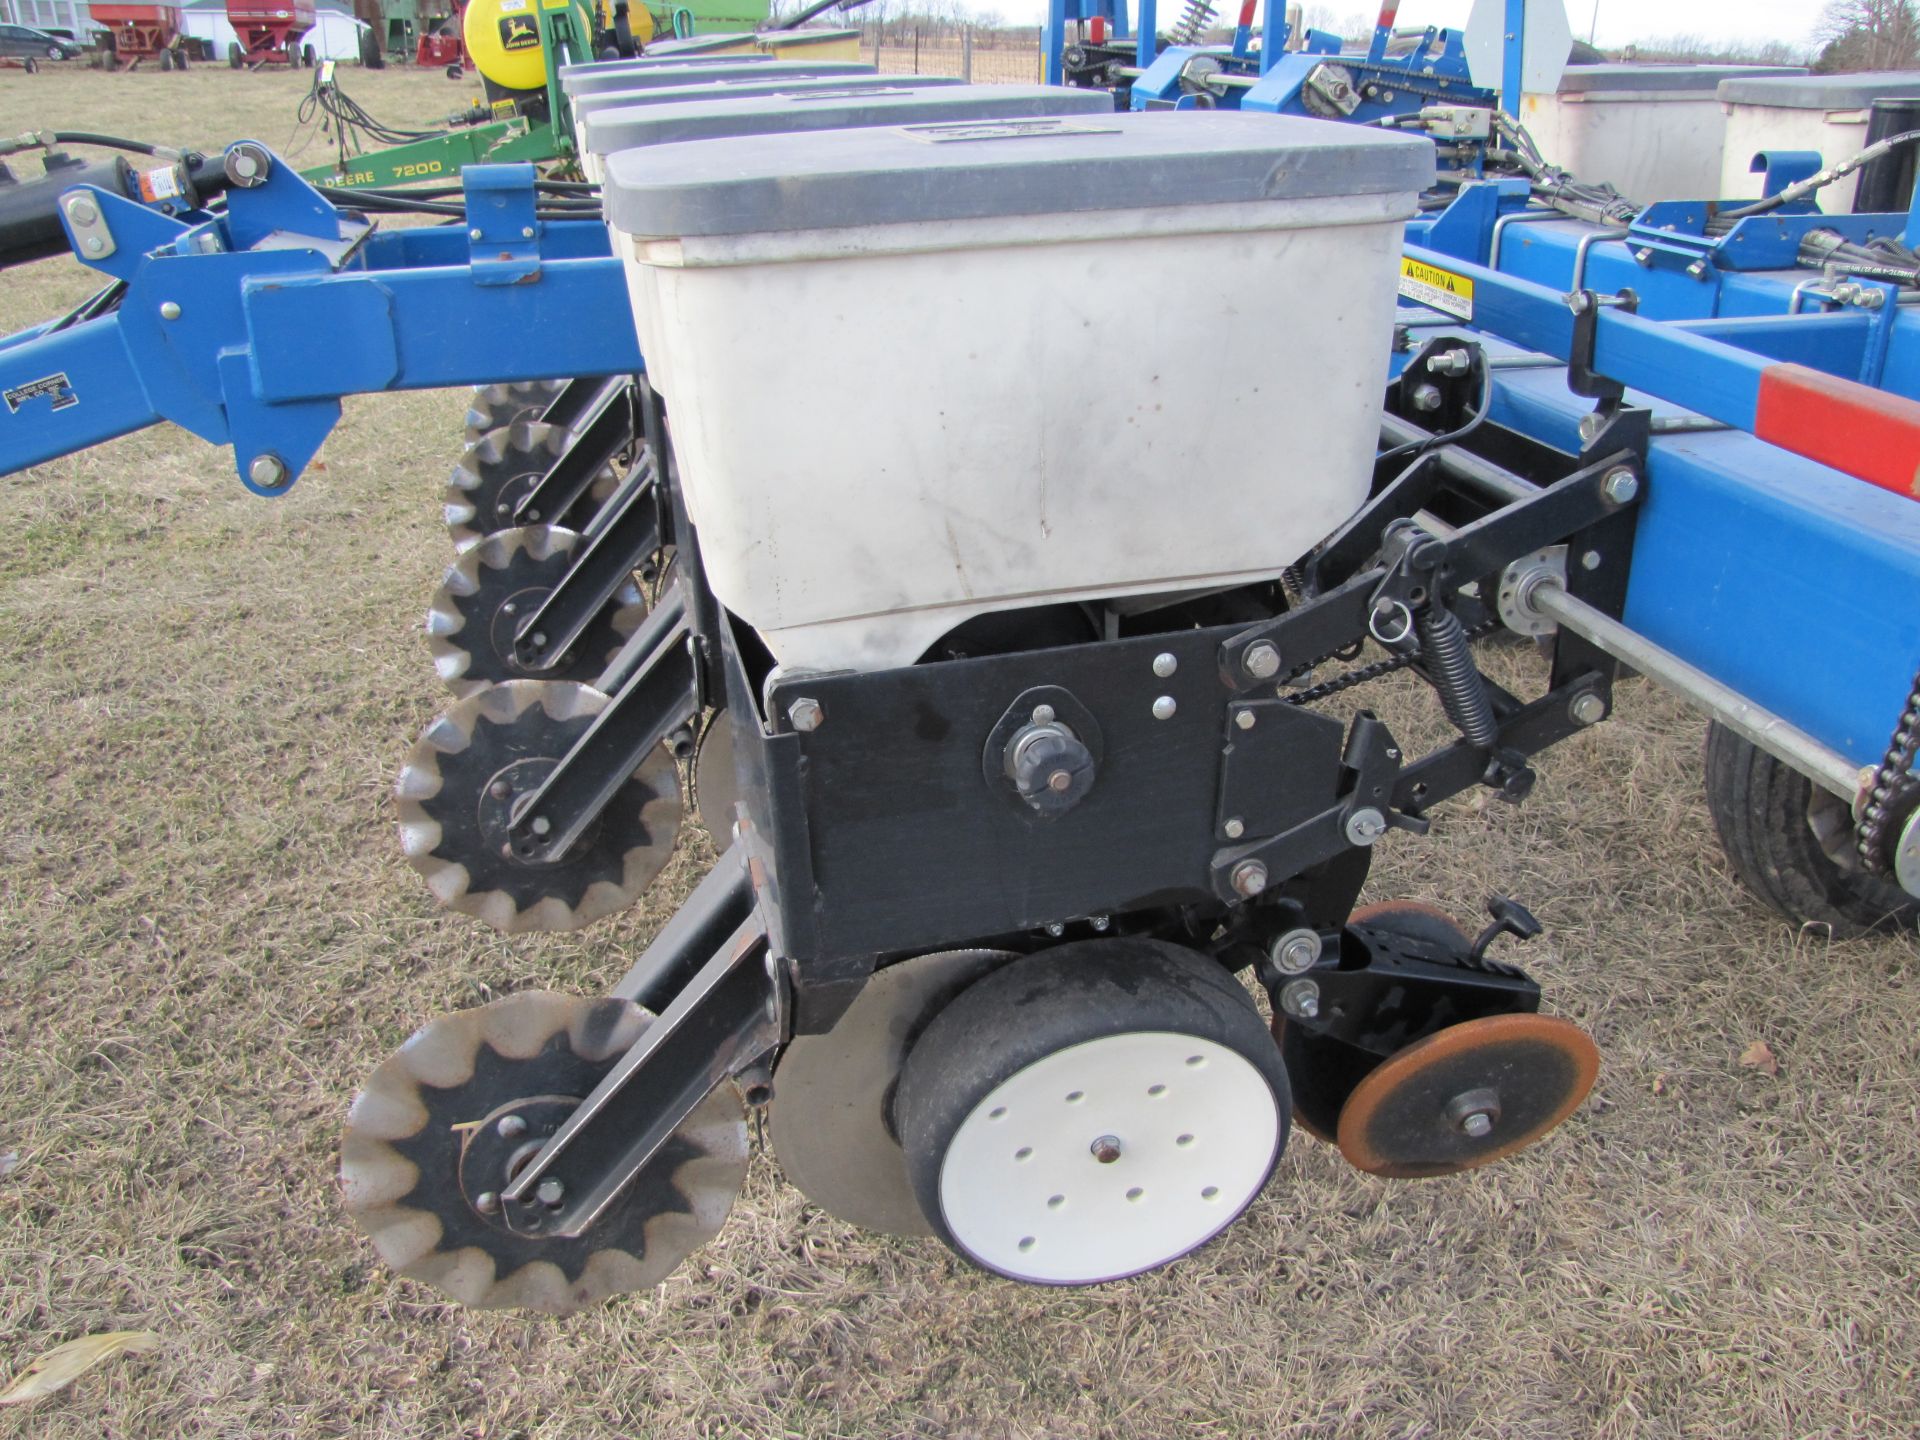 Kinze 3000 6-row planter w/ splitter (plus extra row), double frame, 30’’, hyd markers, SN 643197 - Image 12 of 45